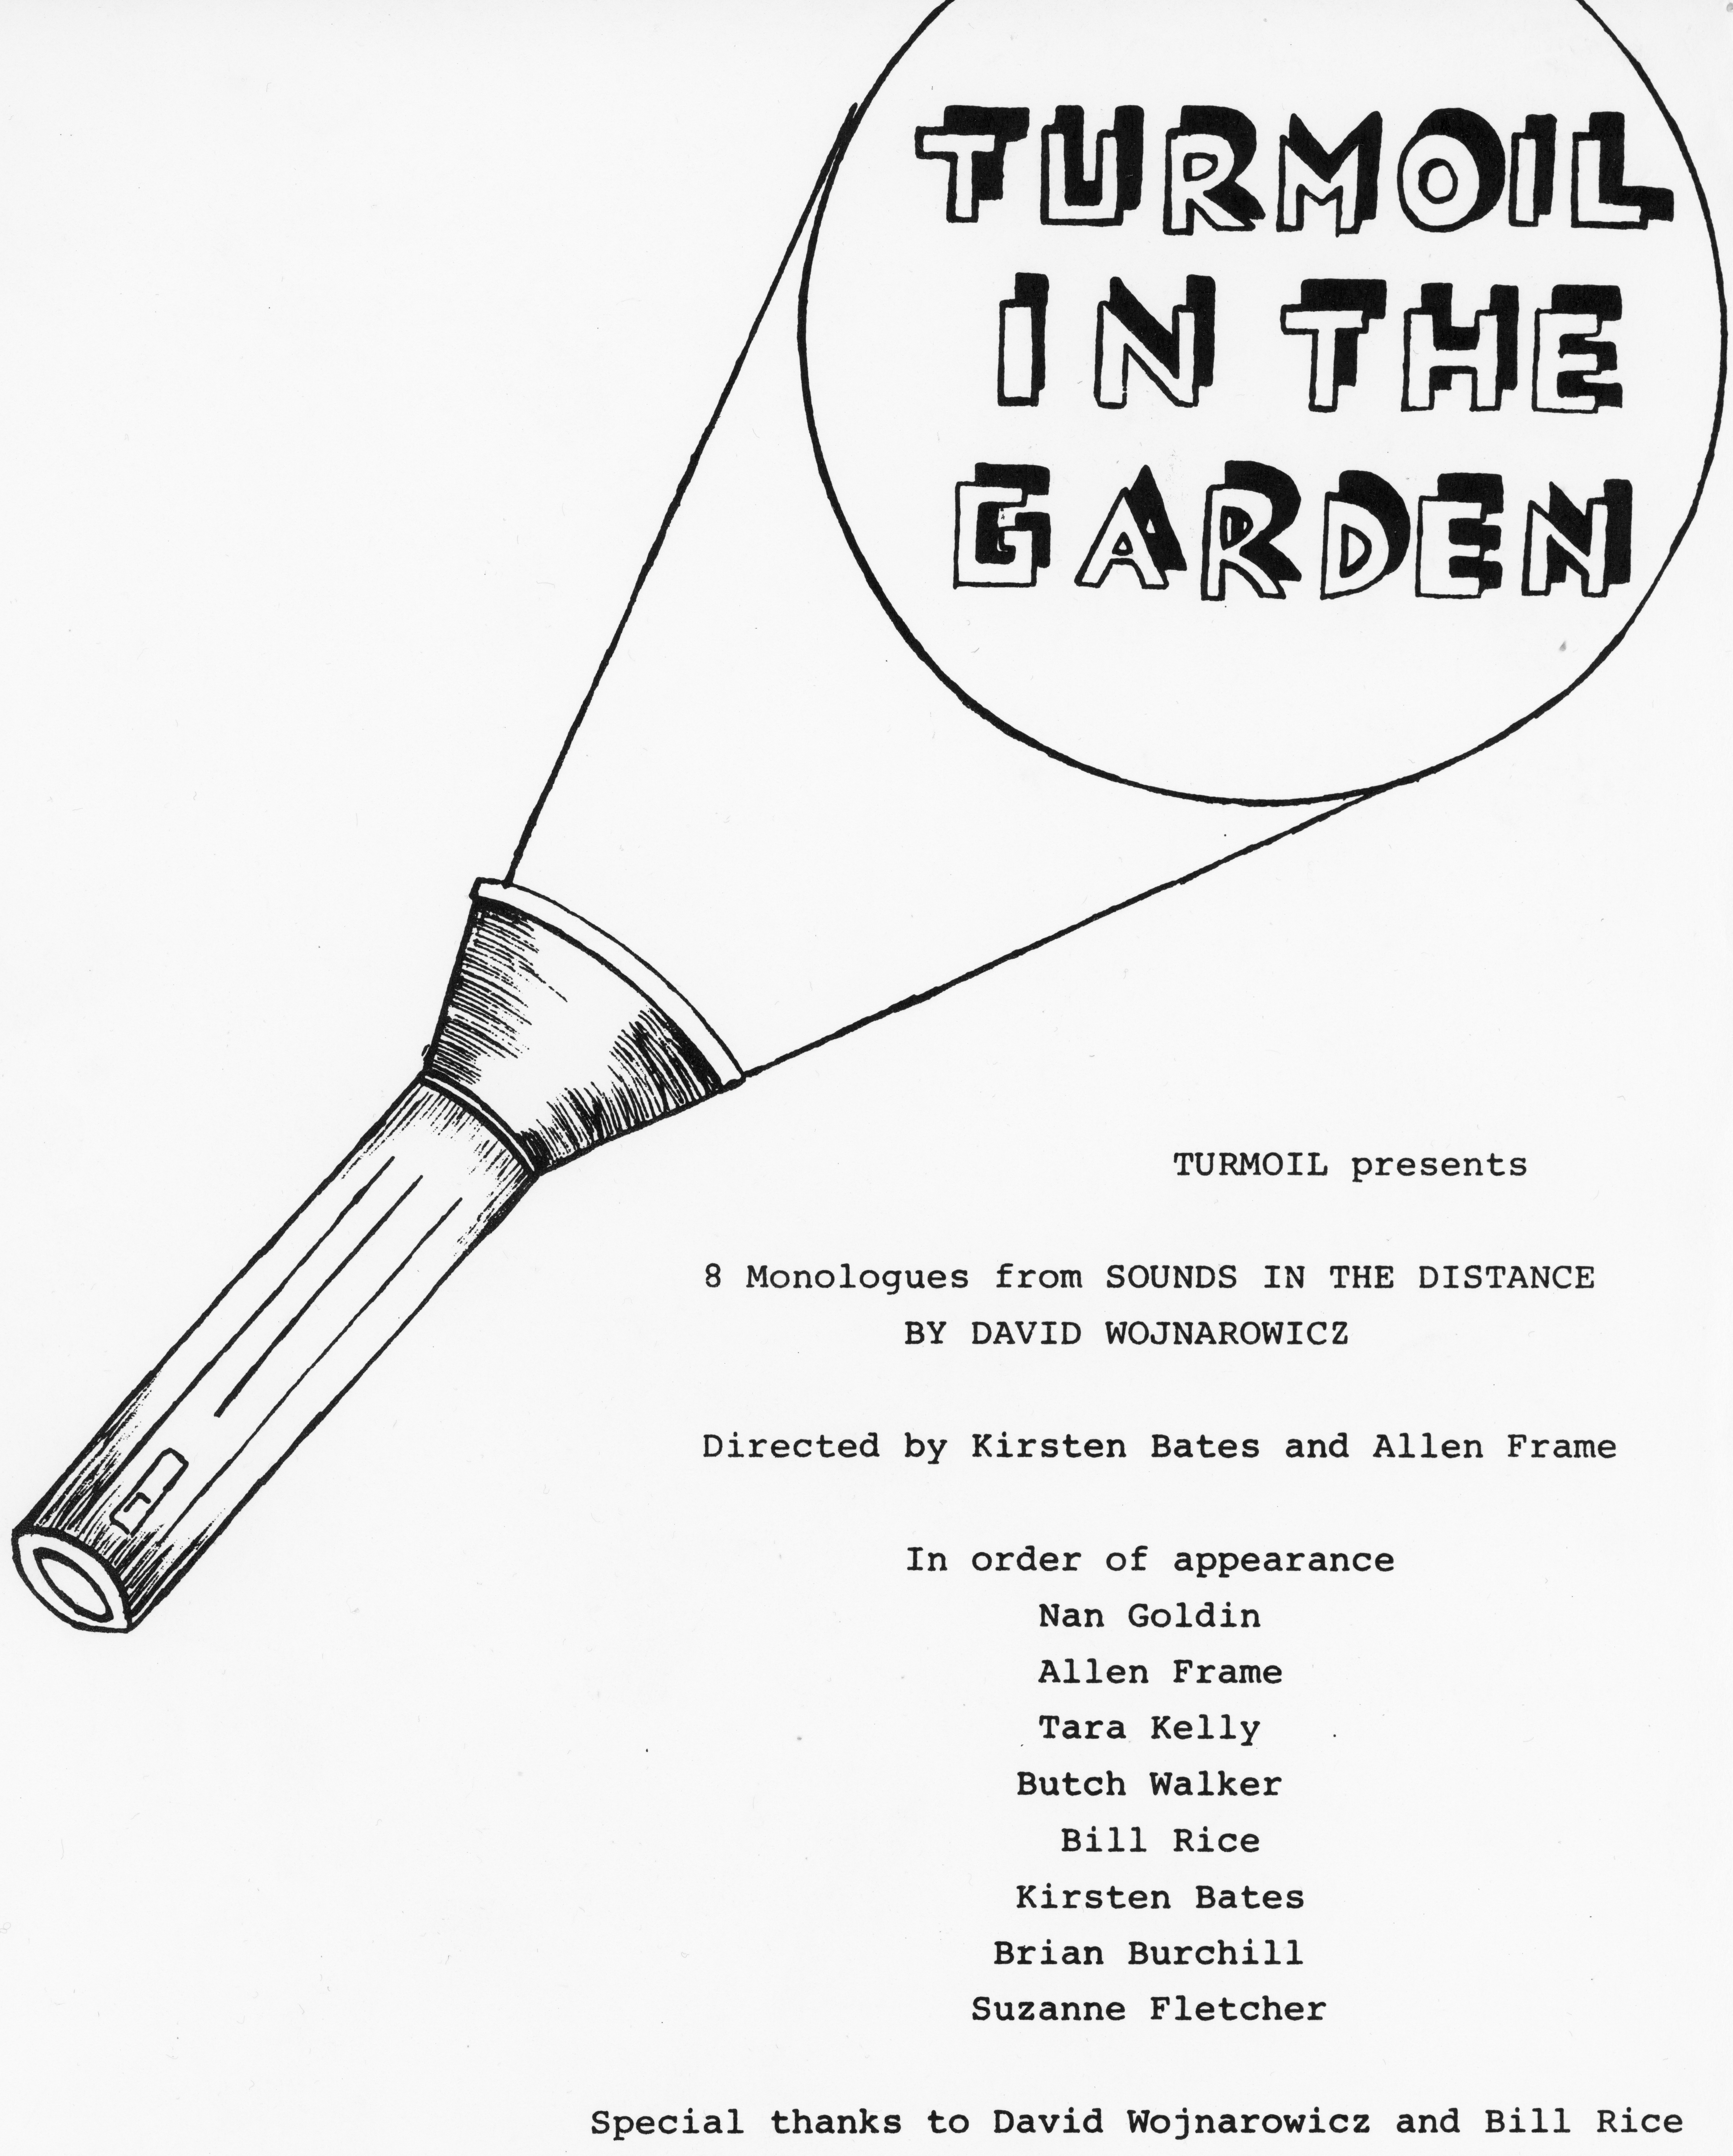 Poster for Turmoil in the Garden, 1983. 8 Monologues from Sounds in the Distance by David Wojnarowicz directed by Kirsten Bates and Allen Frame.